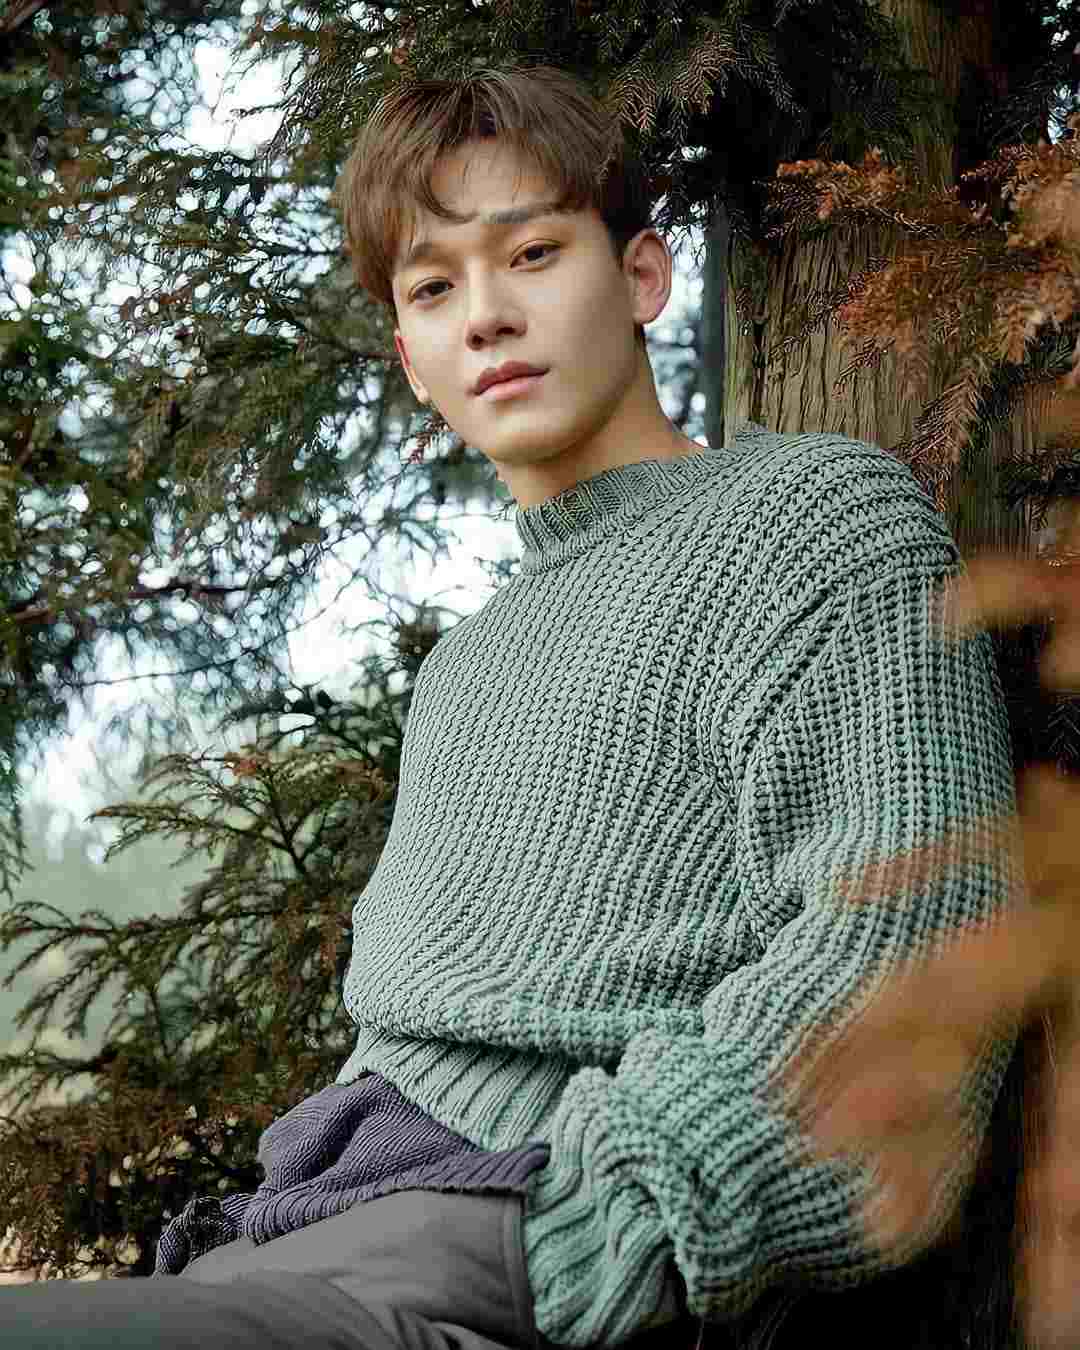 Chen EXO - Biography, Profile, Facts, and Career